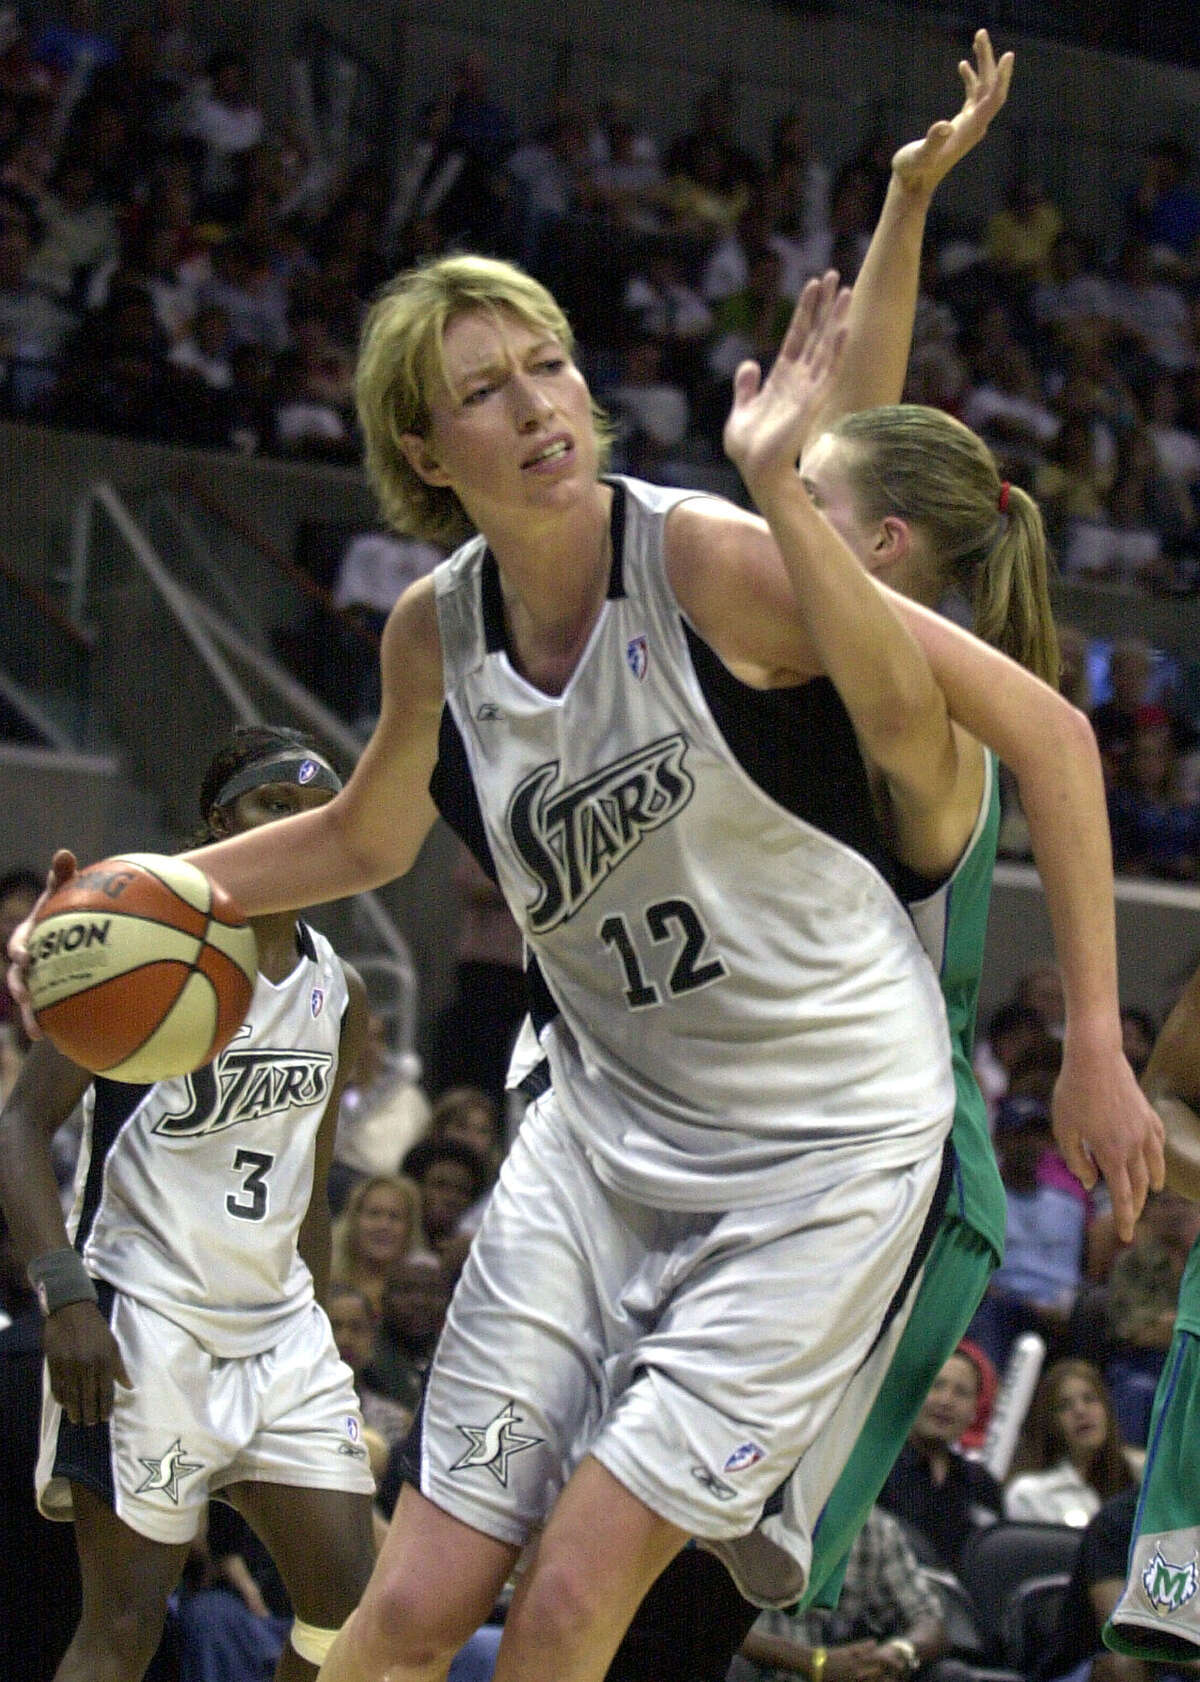 Former San Antonio Silver Stars player Margo Dydek (12) ducks under the arm of Michele Van Gorp in 2003. She holds the Guinness World Record for the most career blocks in the WNBA.